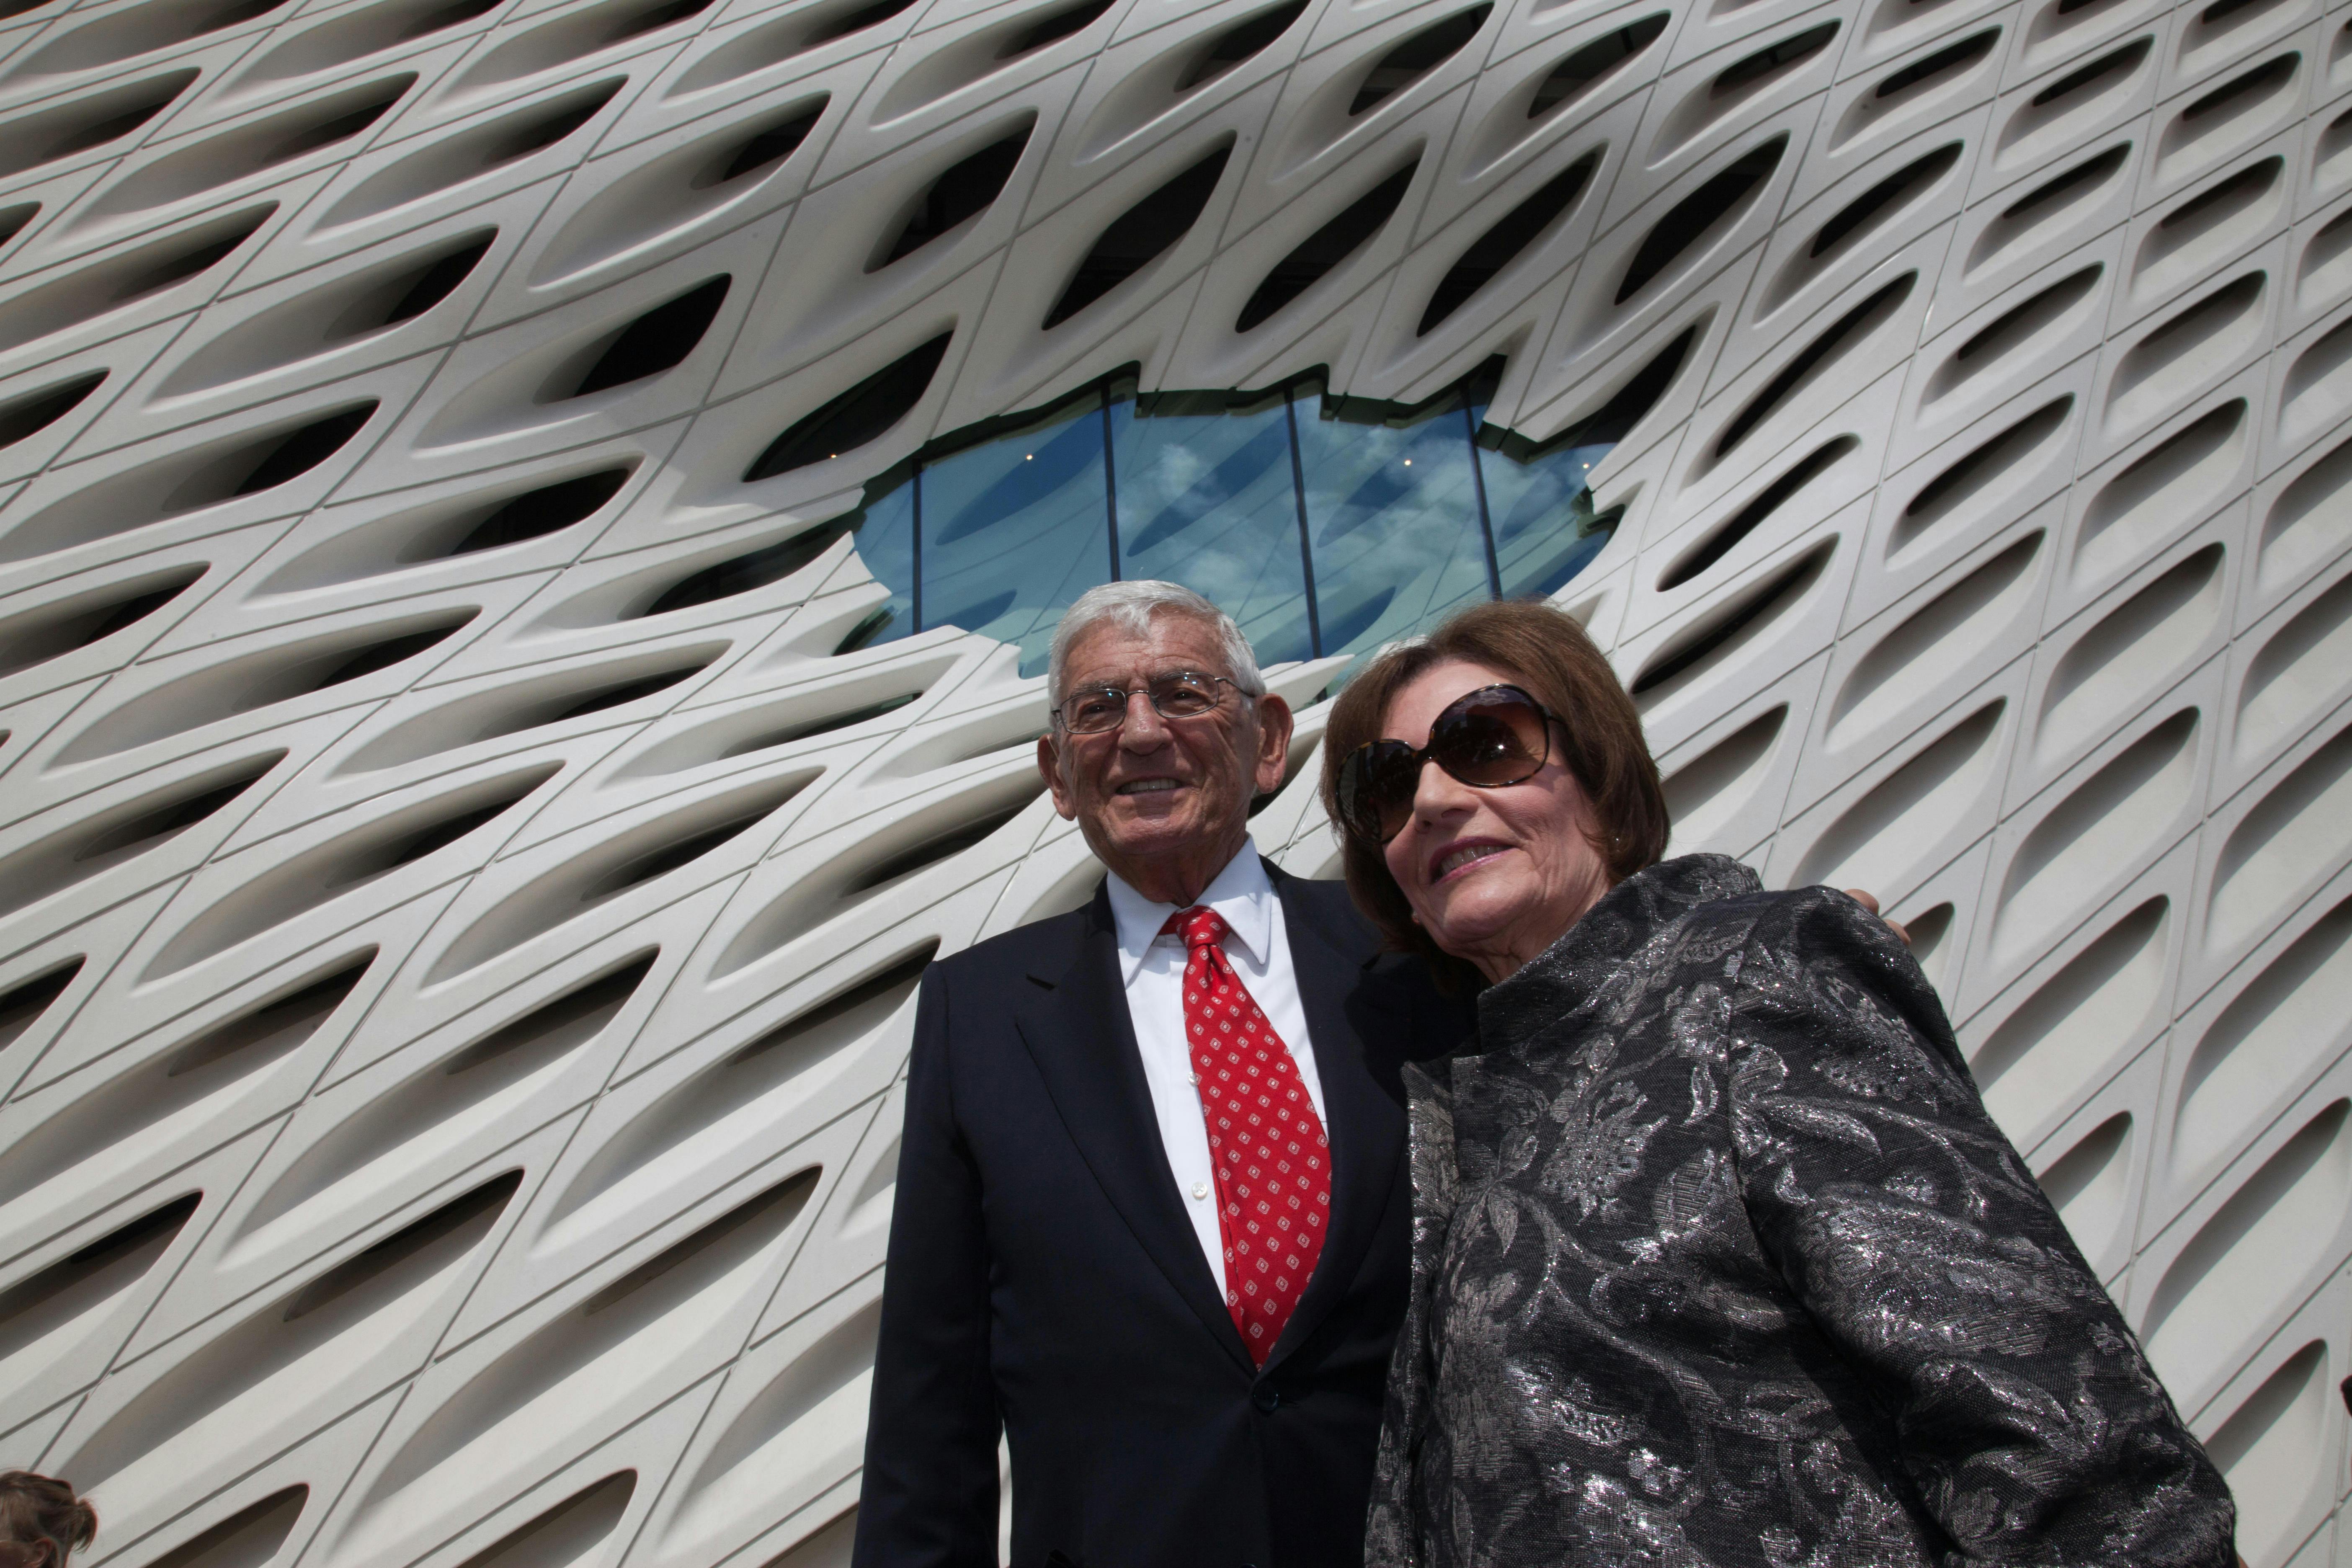 Eli & Edythe Broad in front of the Broad Museum in Los Angeles.